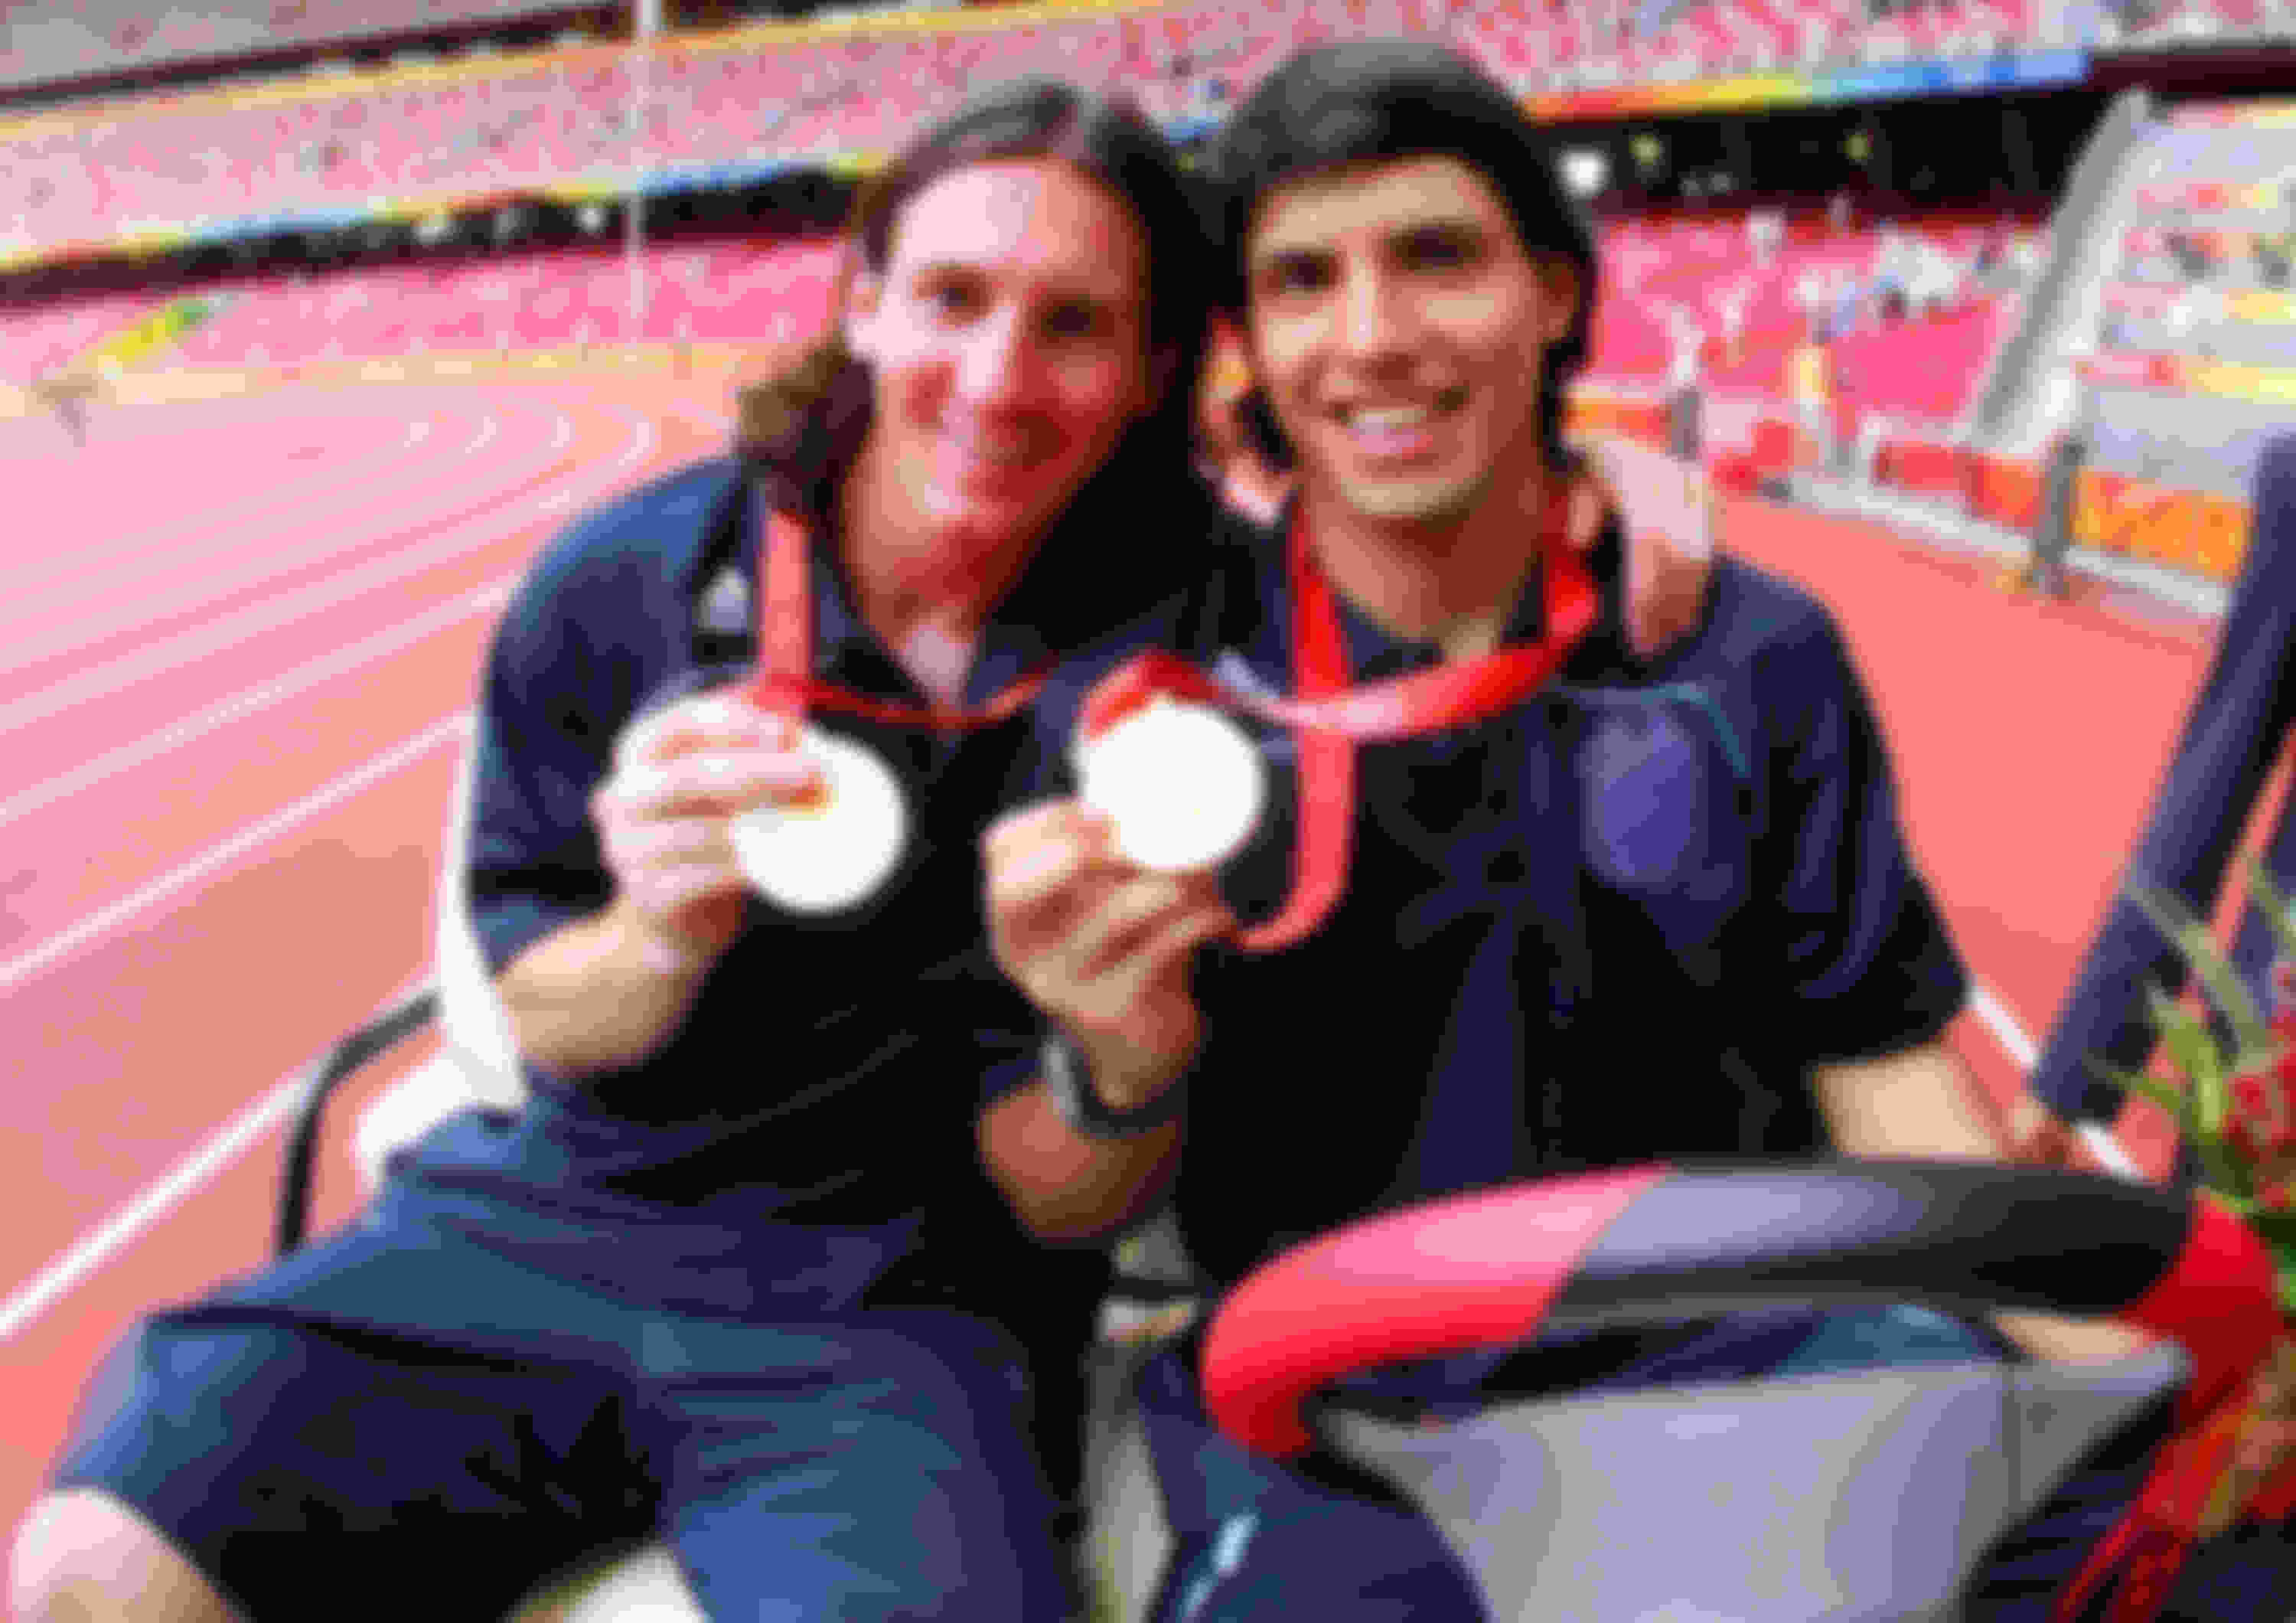 Argentina's Lionel Messi and Sergio Aguero with Beijing 2008 Olympics gold medals